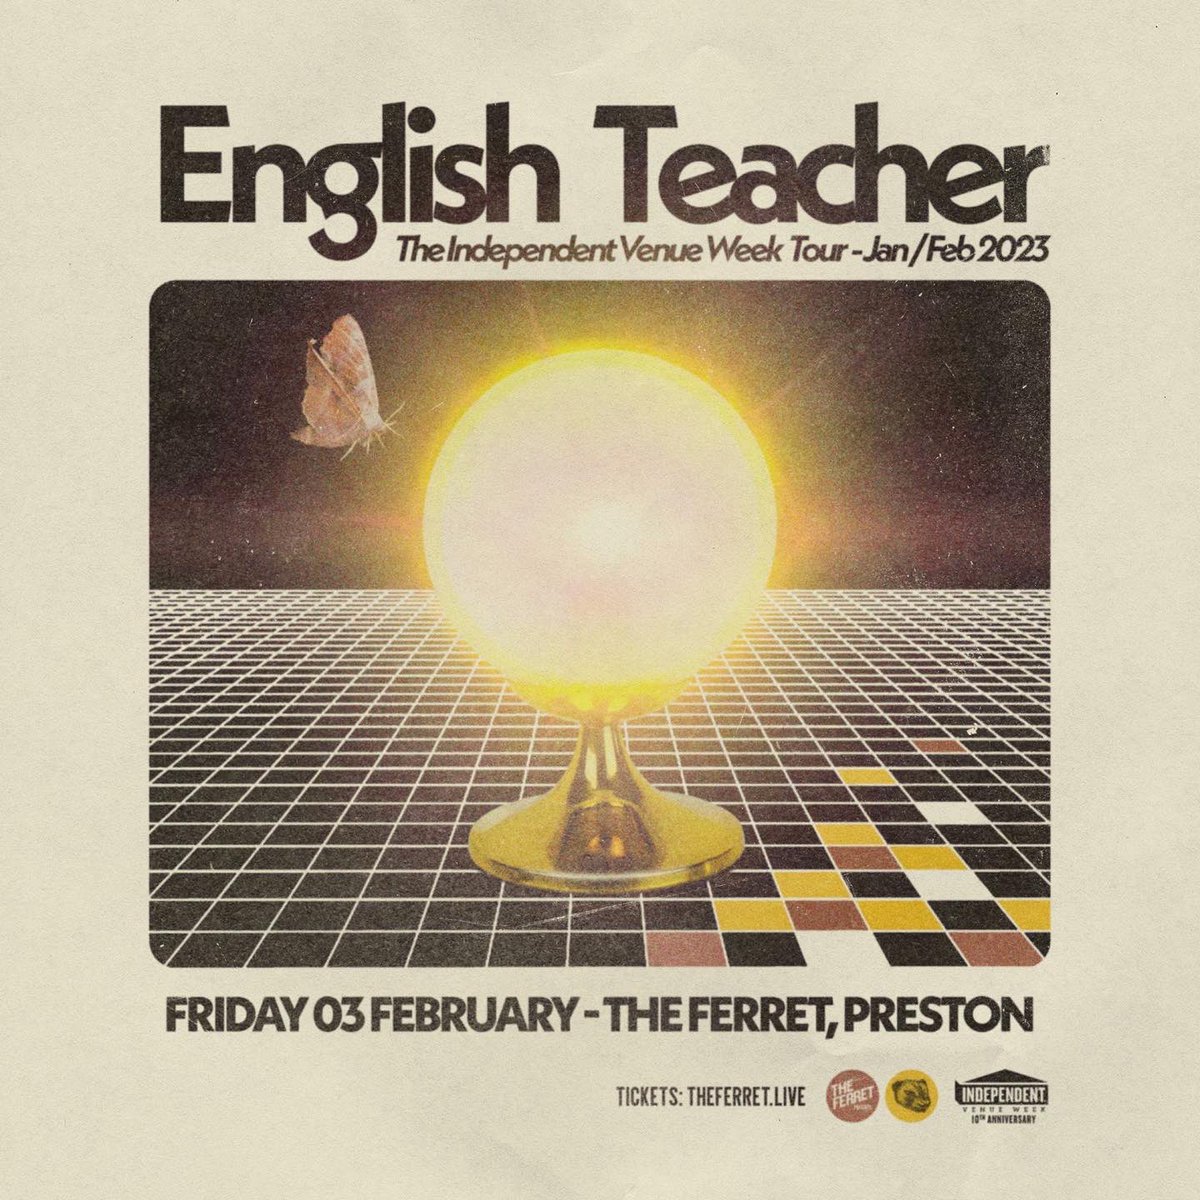 As part of their #IndependentVenueWeek tour, @Englishteac_her visits #TheFerret Friday 3rd February, 2023! ✨ Tickets are on sale here NOW! 👇 theferret.live/listings/engli…